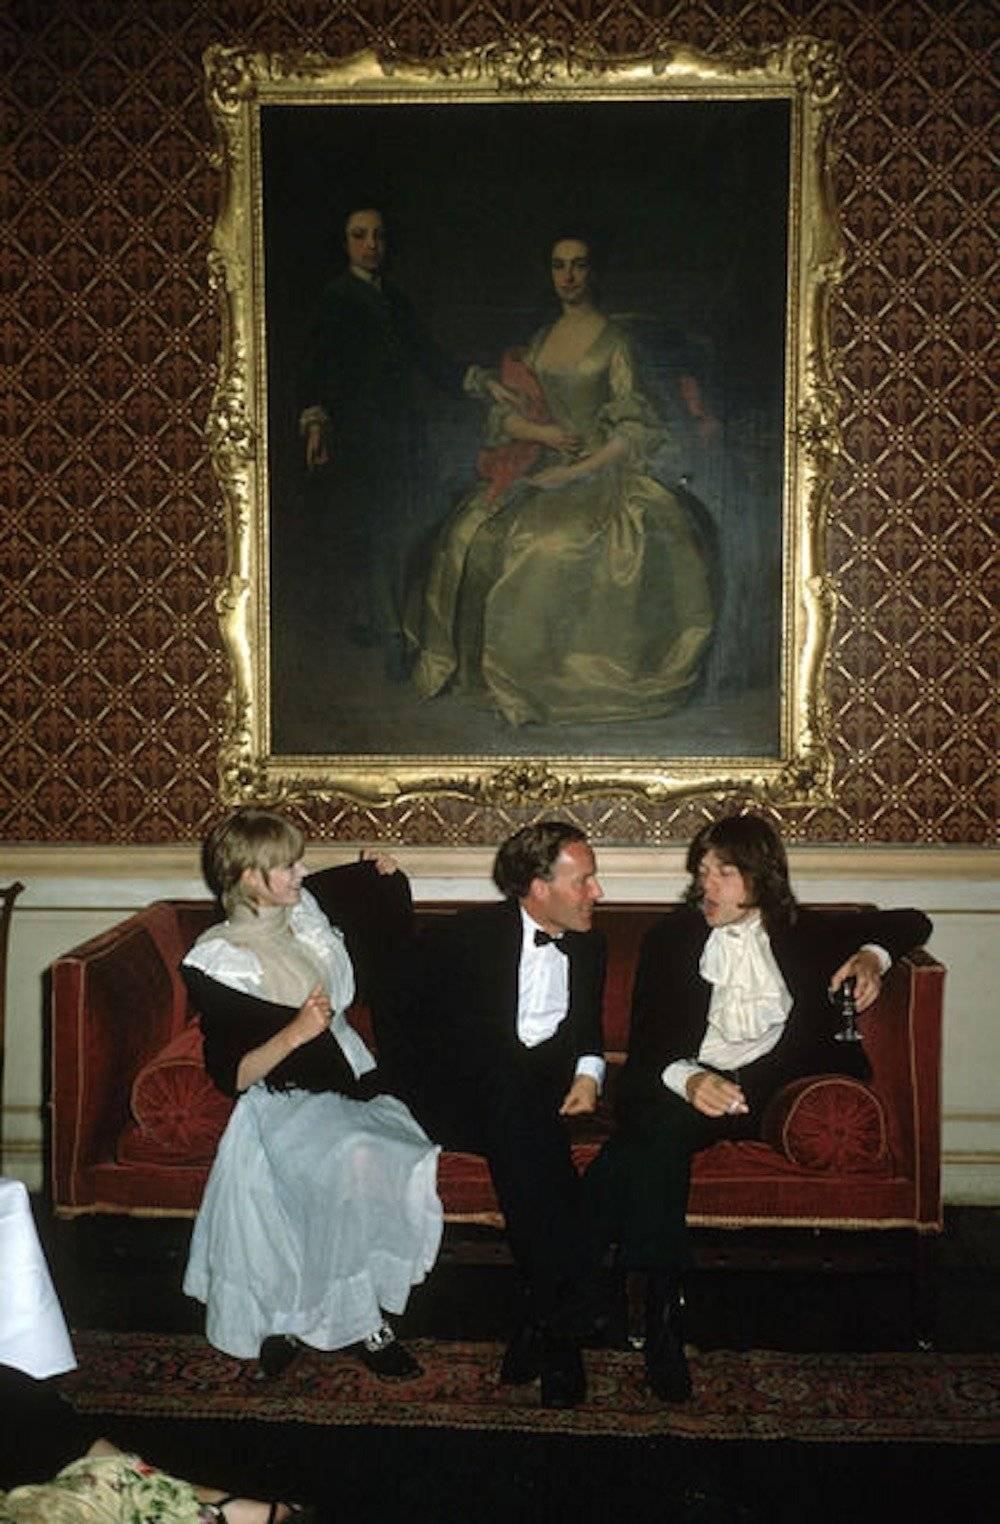 Slim Aarons
Pop and Society
60 x 40 inches
Estate Edition

1968: From left to right; singer Marianne Faithfull, the Honorable Desmond Guinness and Mick Jagger (of the Rolling Stones) sit on a sofa under a large gilt framed painting of a woman in